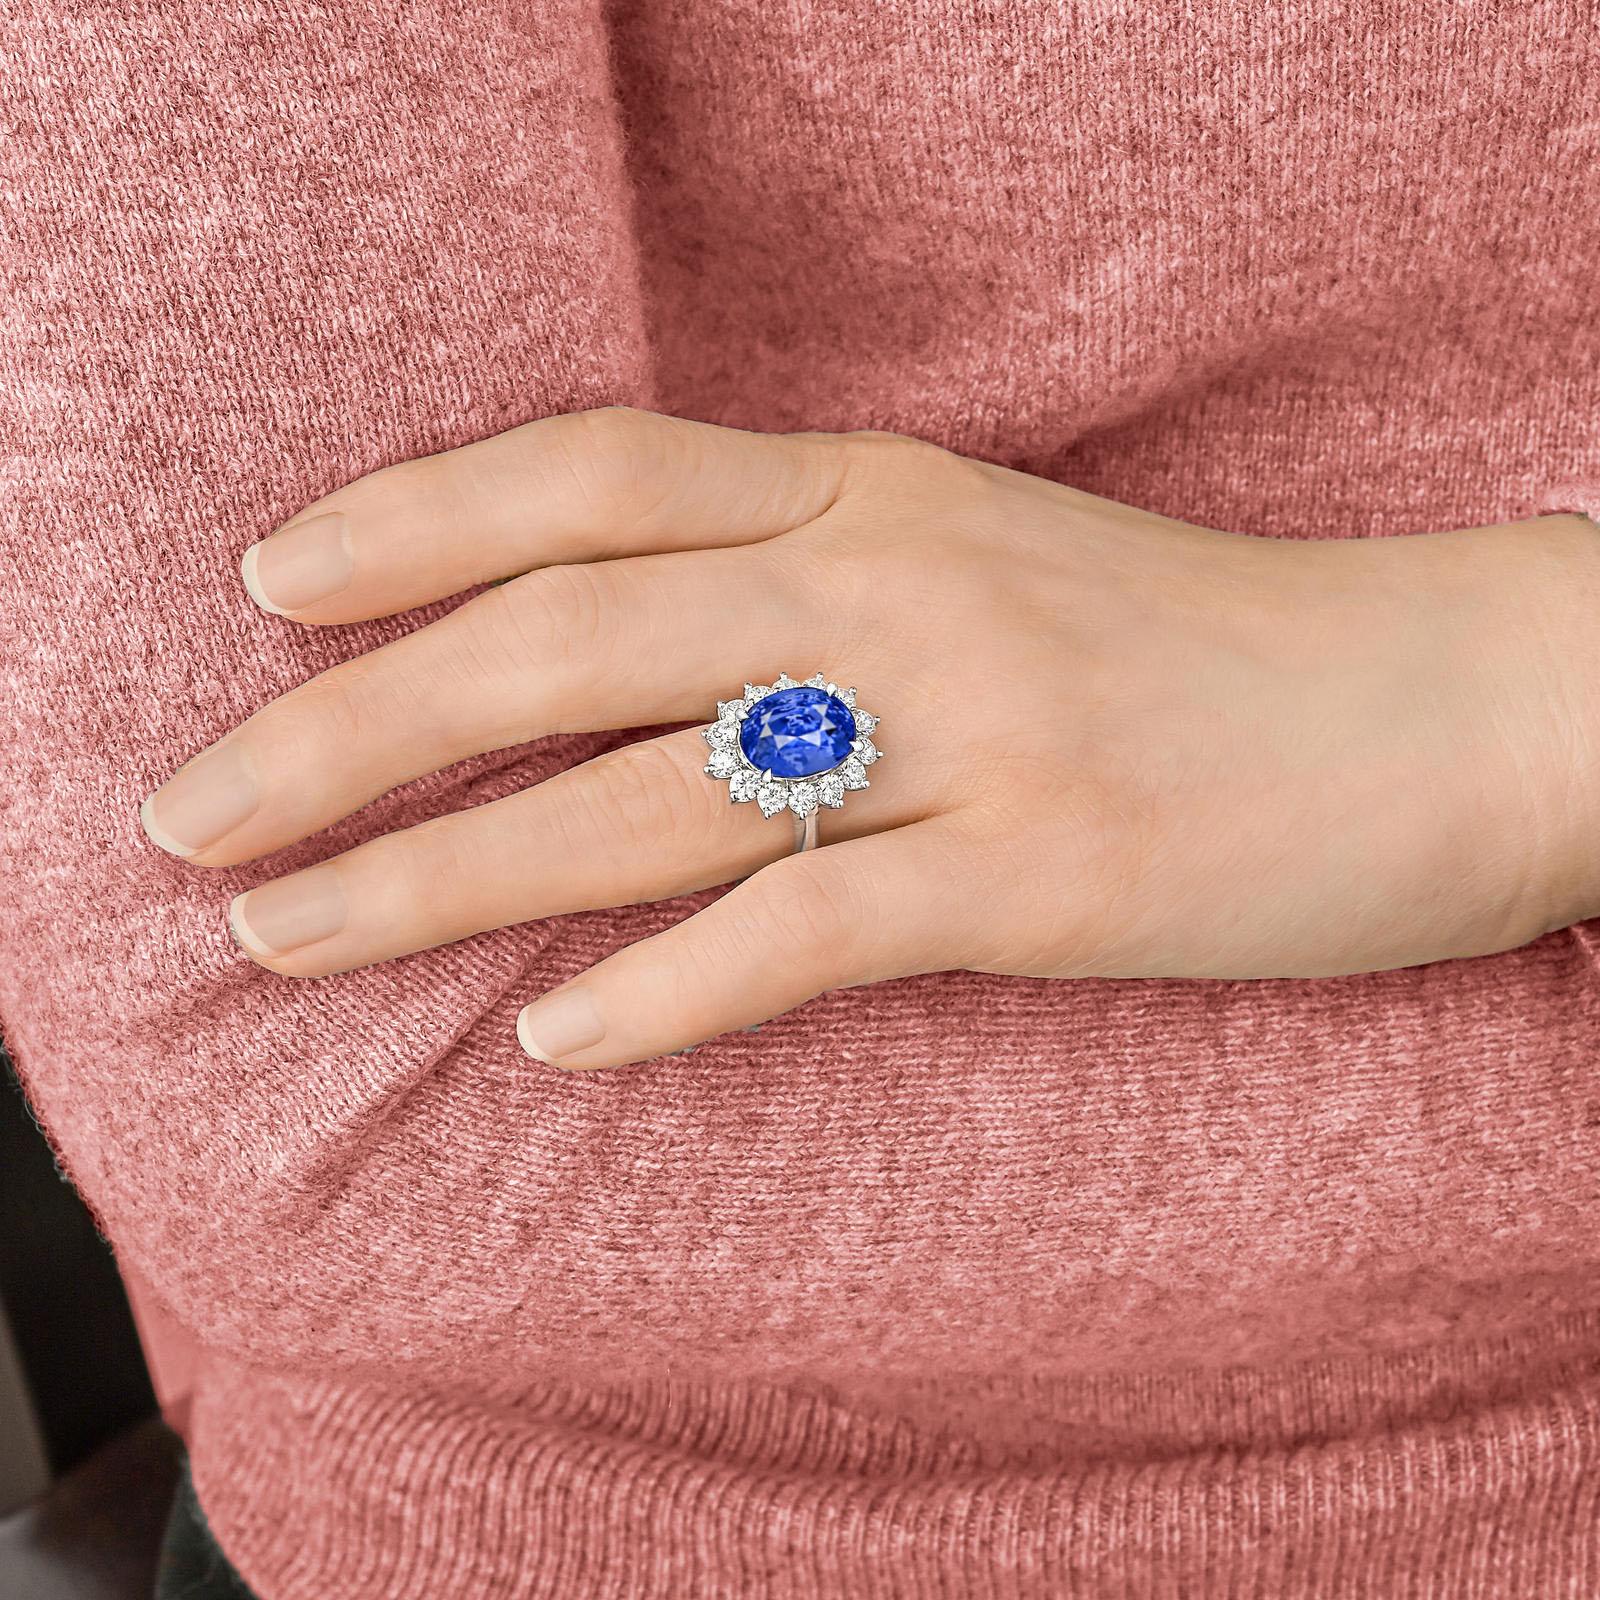 Introducing a truly extraordinary piece of fine jewelry: the GIA Certified 5 Carat Intense BURMESE Blue No Heat Sapphire Diamond Ring.

Immerse yourself in the captivating allure of this exquisite ring, featuring a stunning 5 carat Burmese Blue No